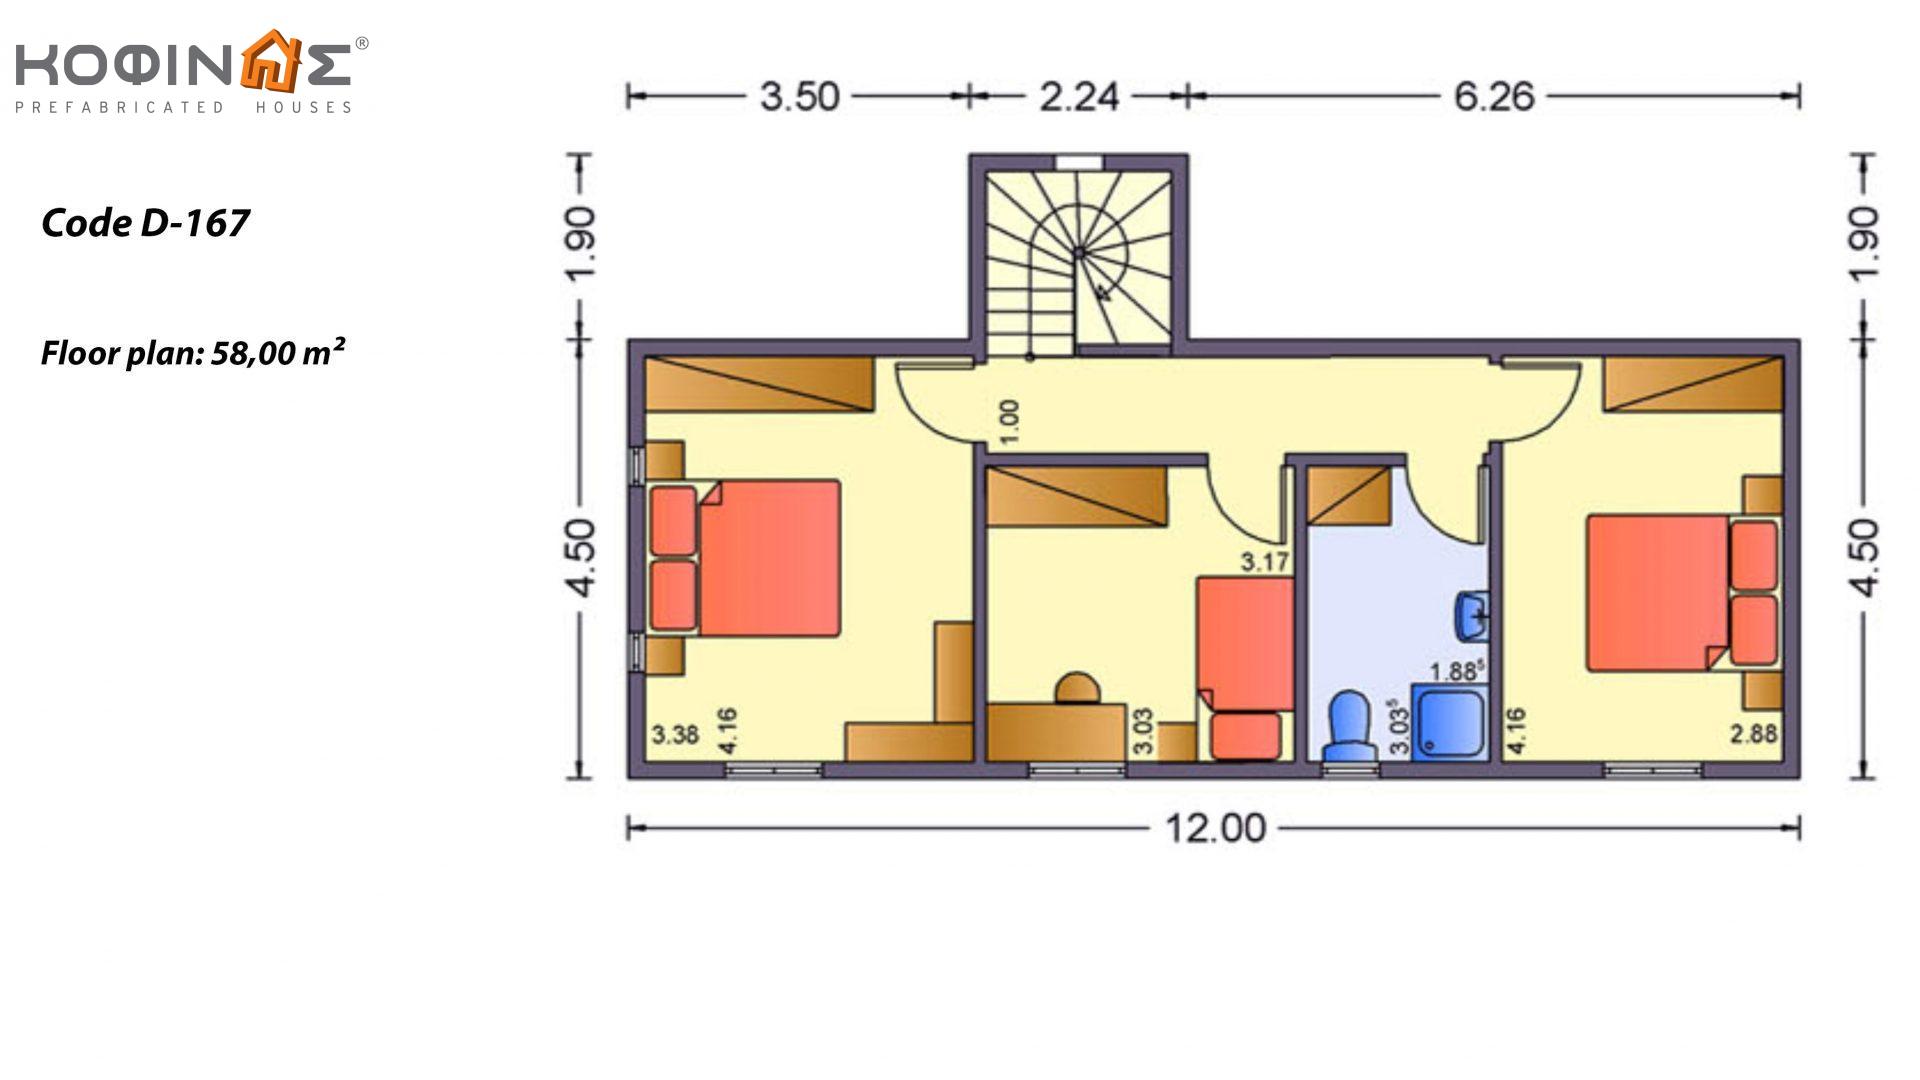 2-story house D-167, total surface of 167,00 m²,covered roofed areas 15.10 m²